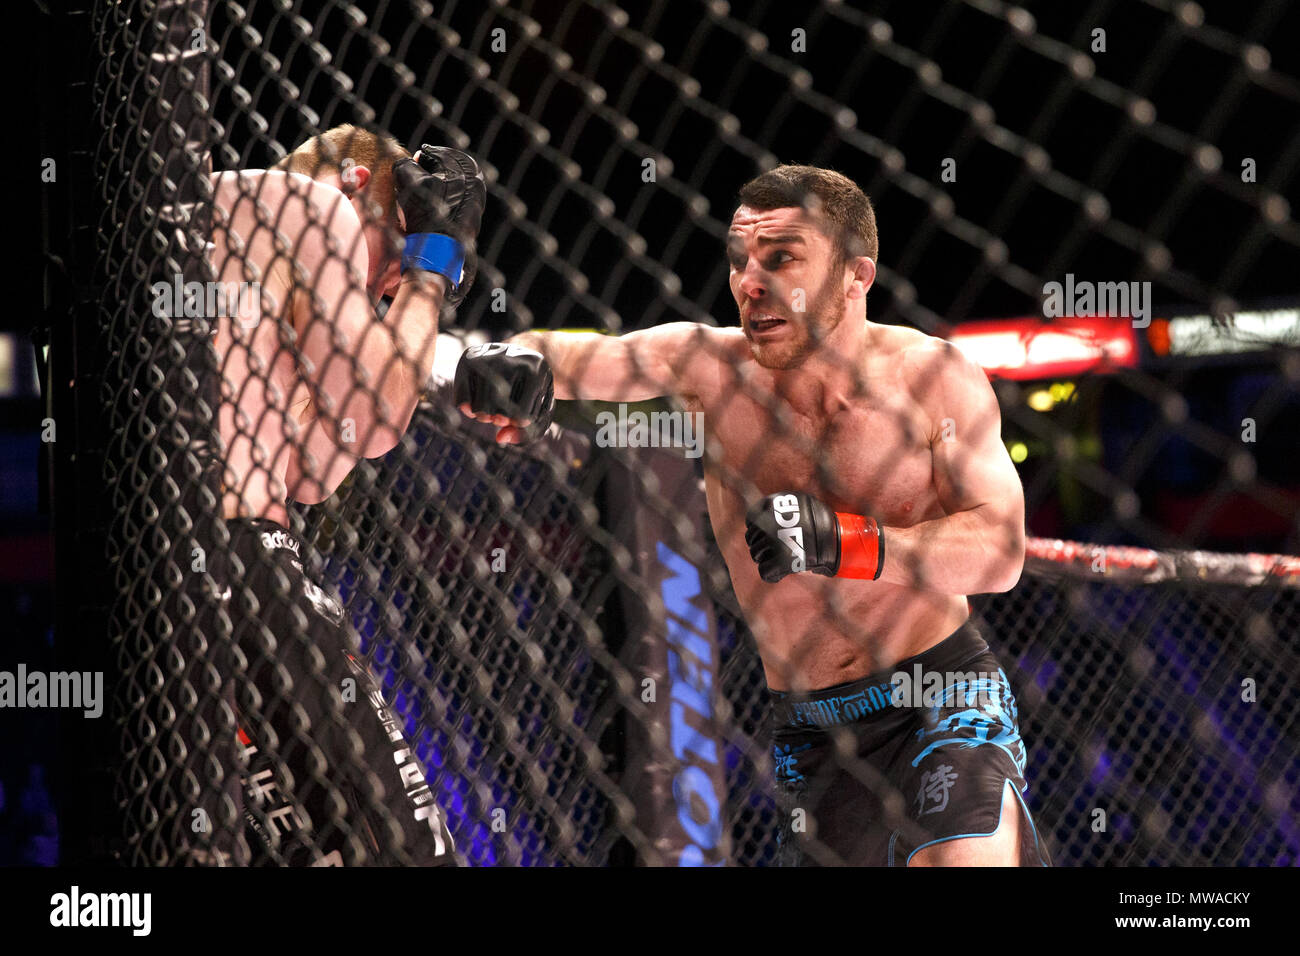 Dean Garnett (right) hits Michael Tobin with a punch against the cage at ACB 54 in Manchester, UK. Absolute Championship Berkut, Mixed Martial Arts, MMA fight. Stock Photo